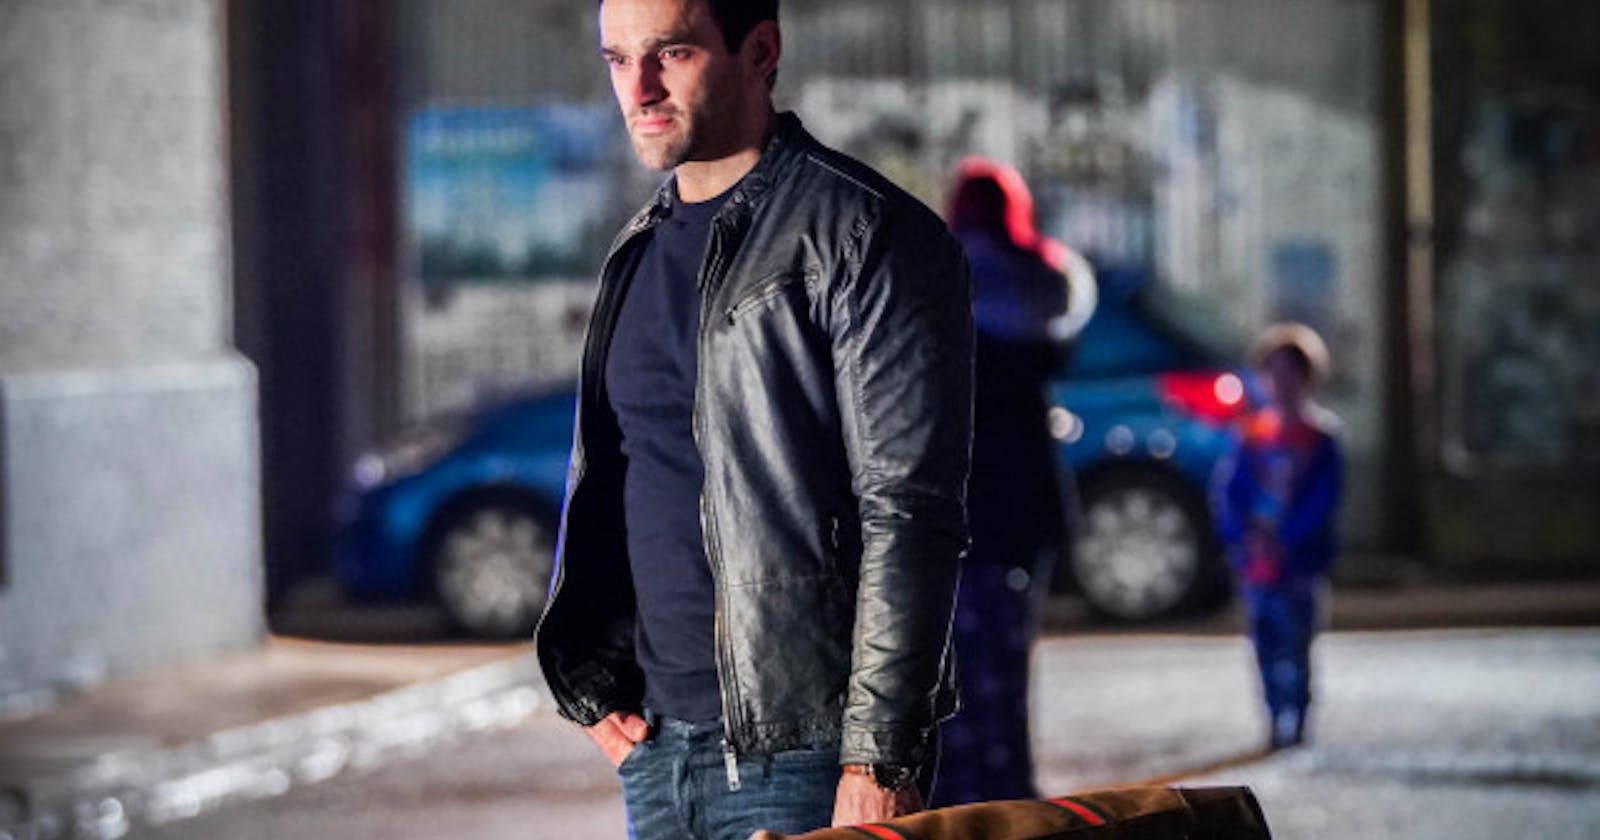 Kush exits EastEnders in dramatic episode